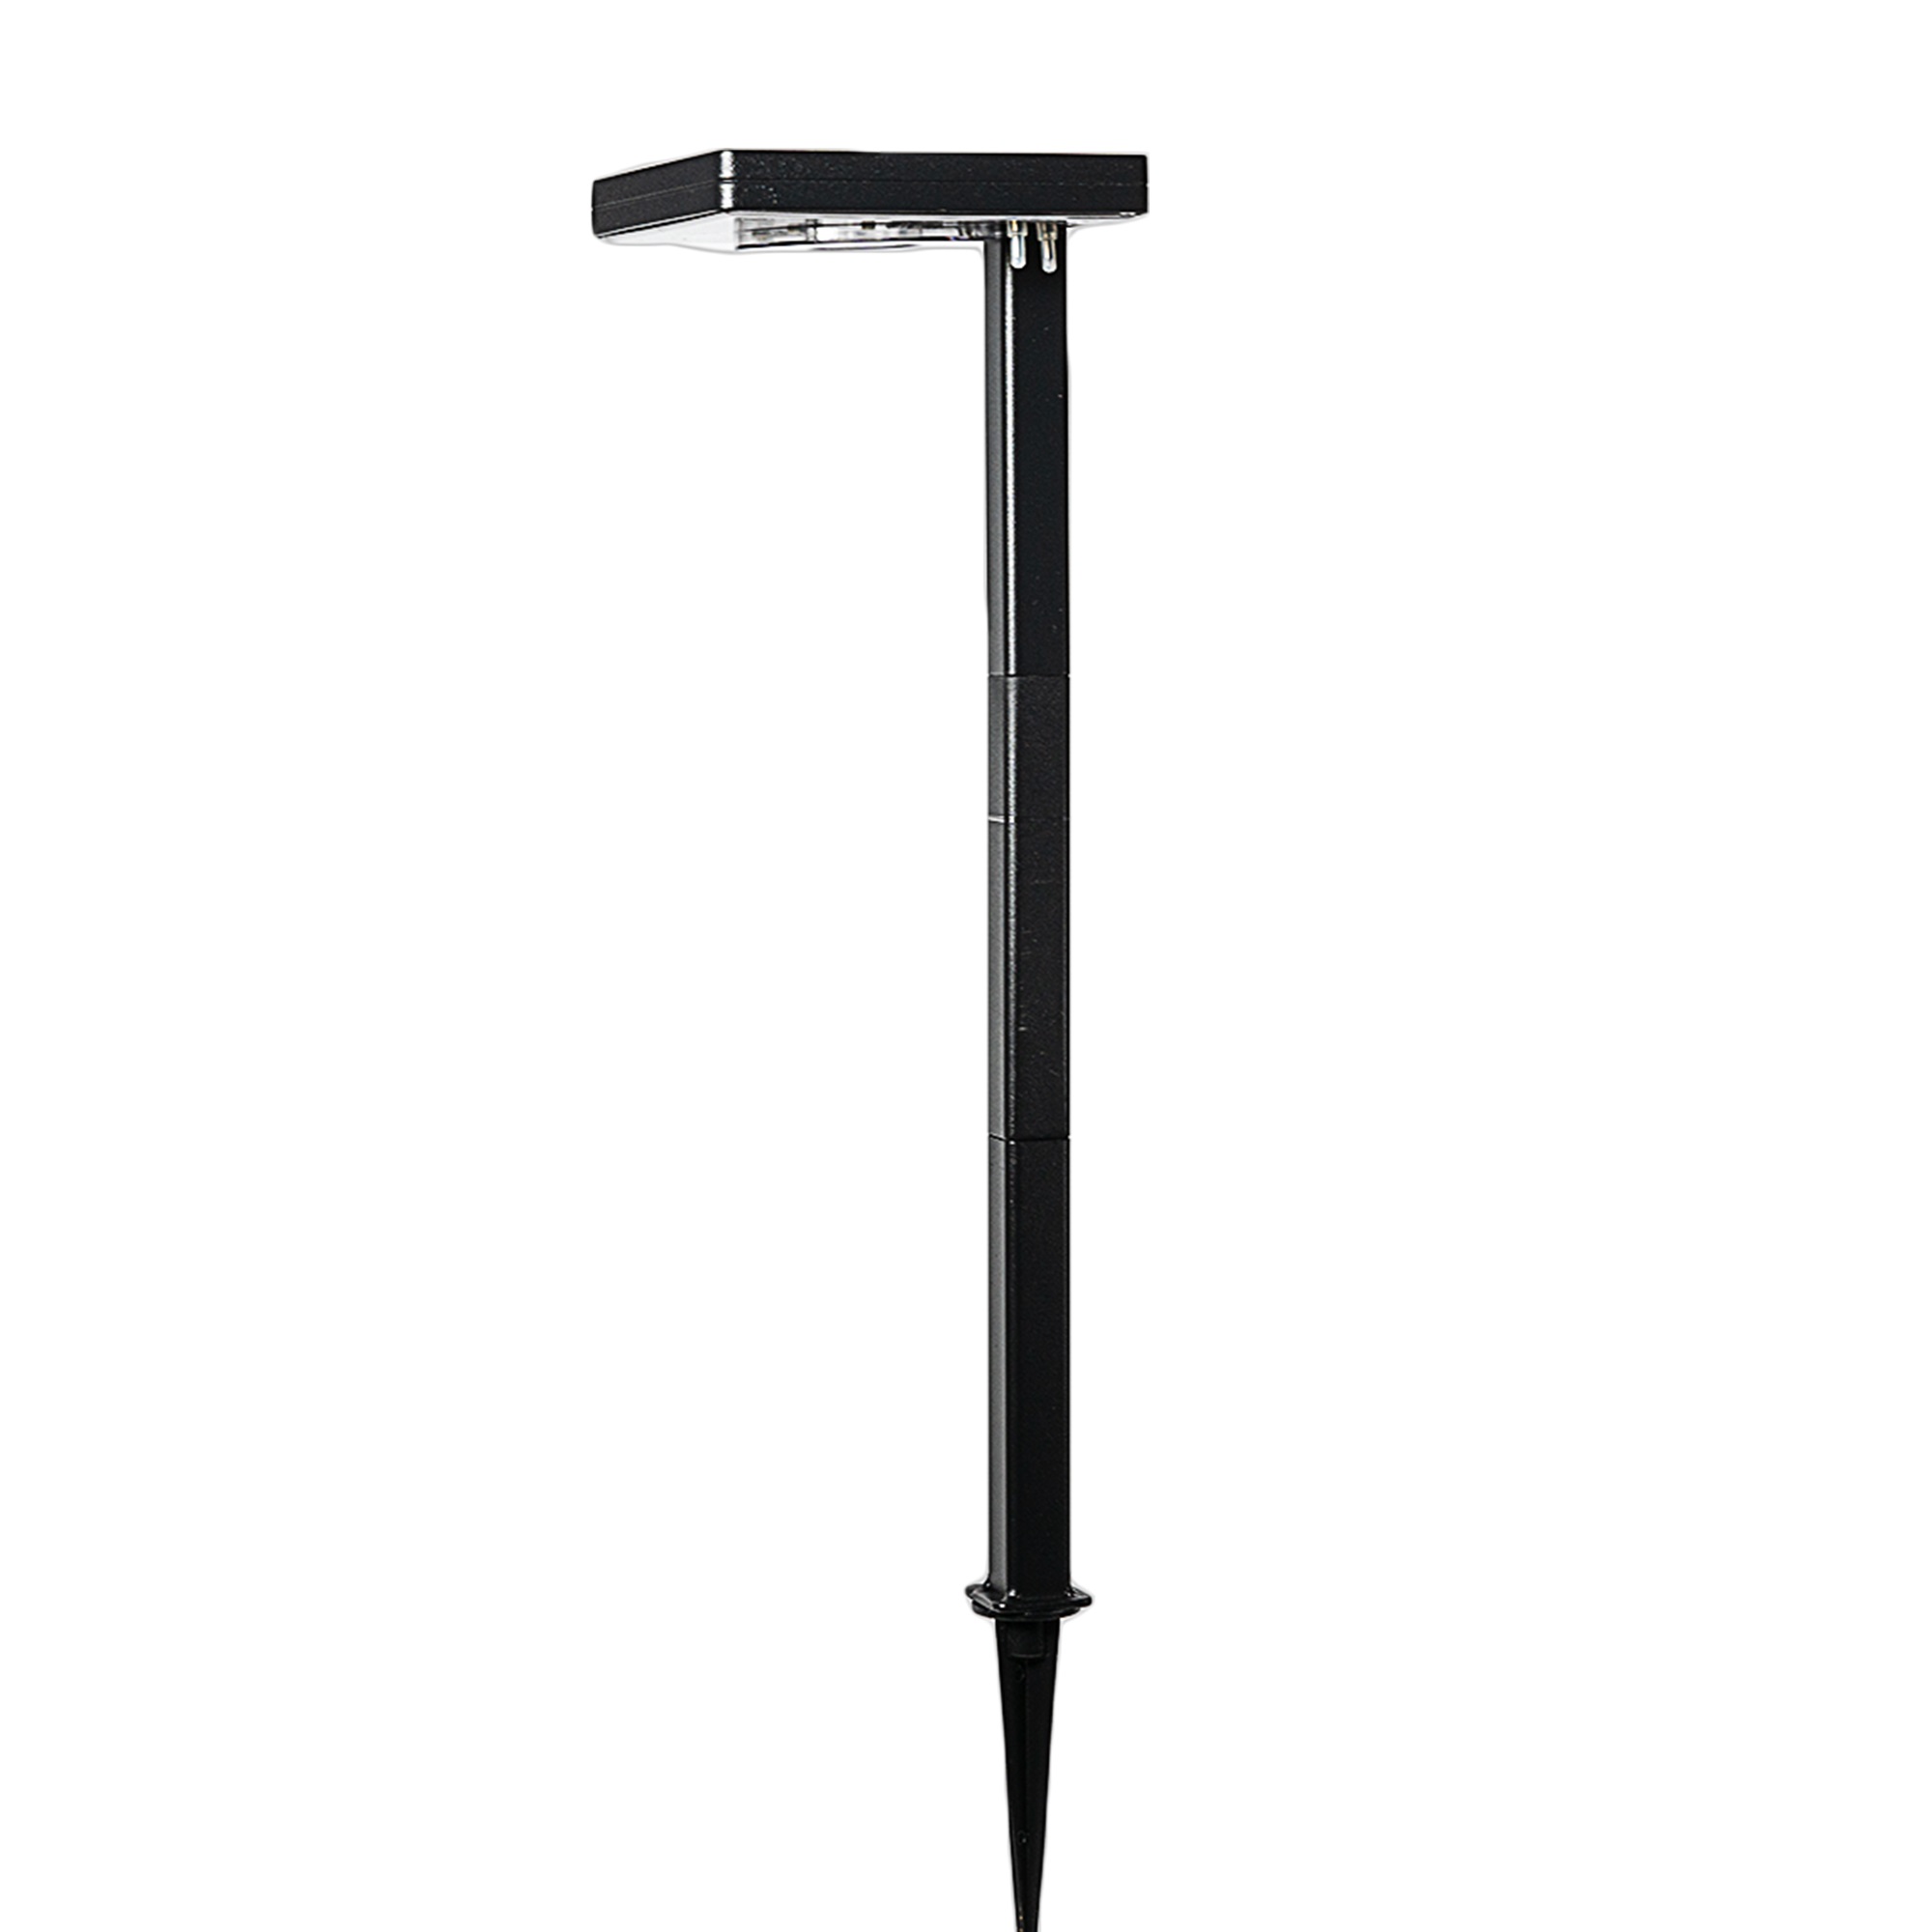 Gama Sonic Contemporary Square Solar Path Light with 3 Ground Stake Mounting Options